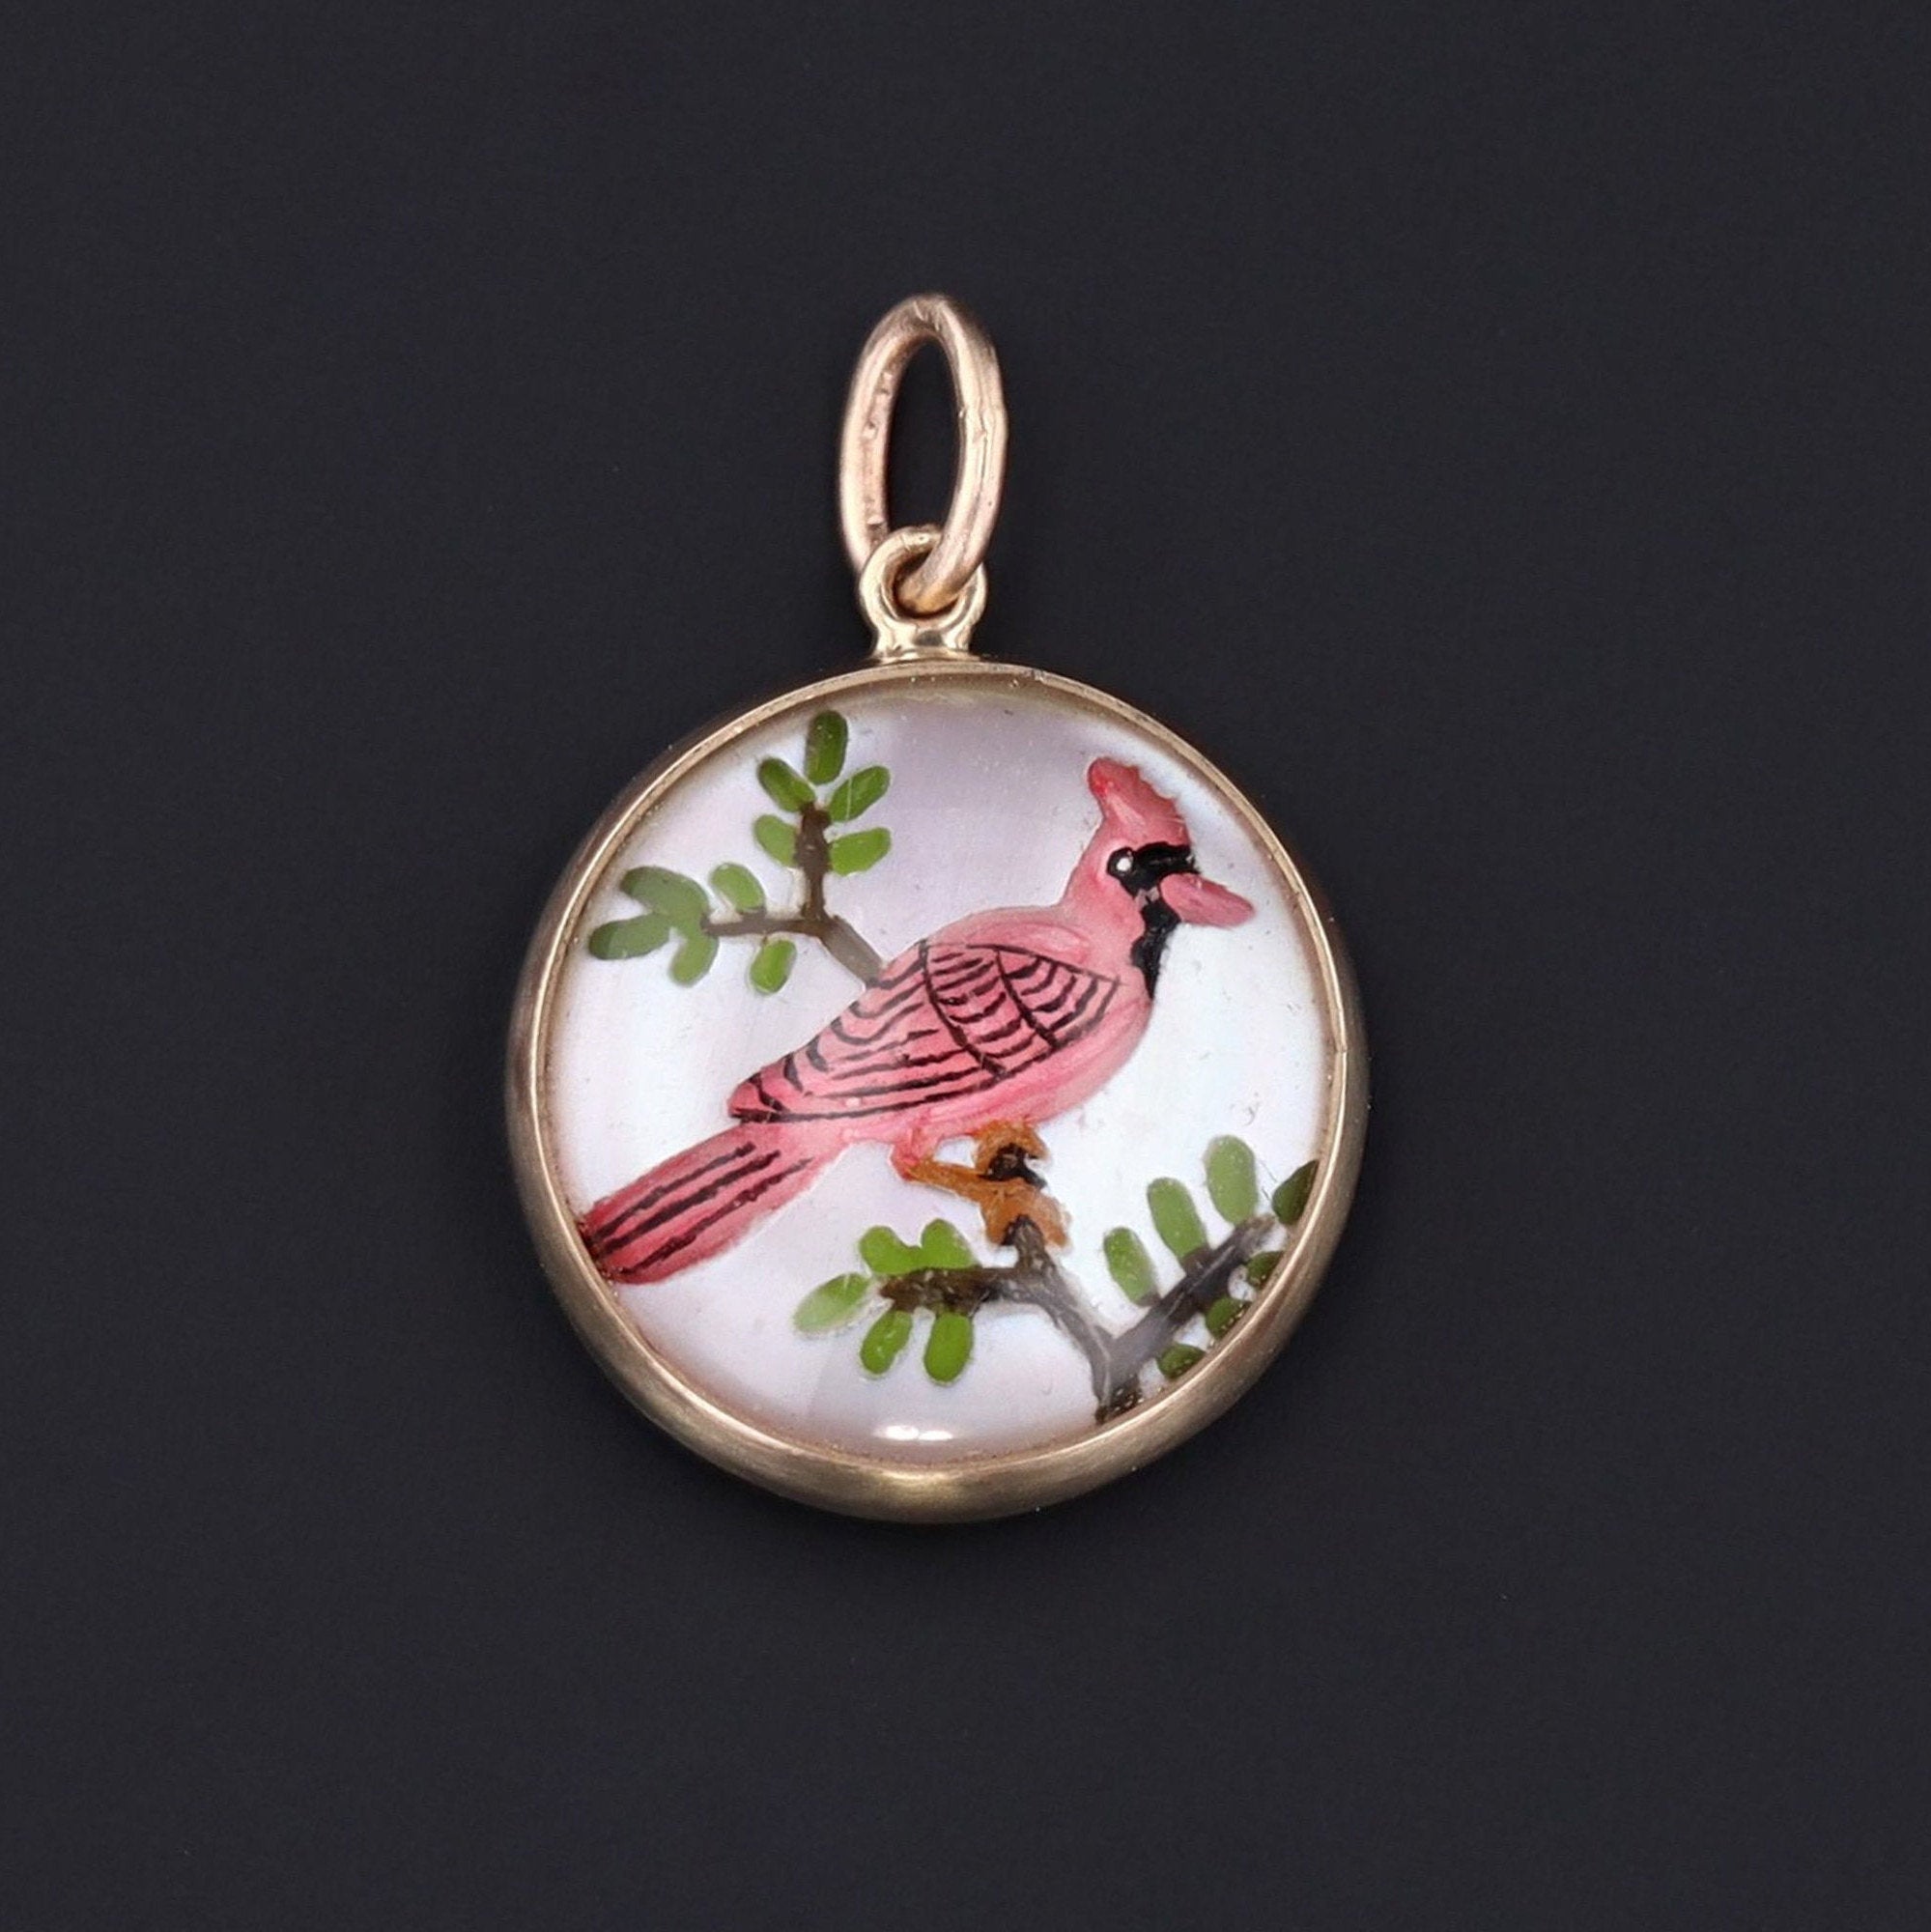 Cardinal Charm | Antique Reverse Painted Crystal Bird Charm | Cardinal Charm | 14k Gold Charm